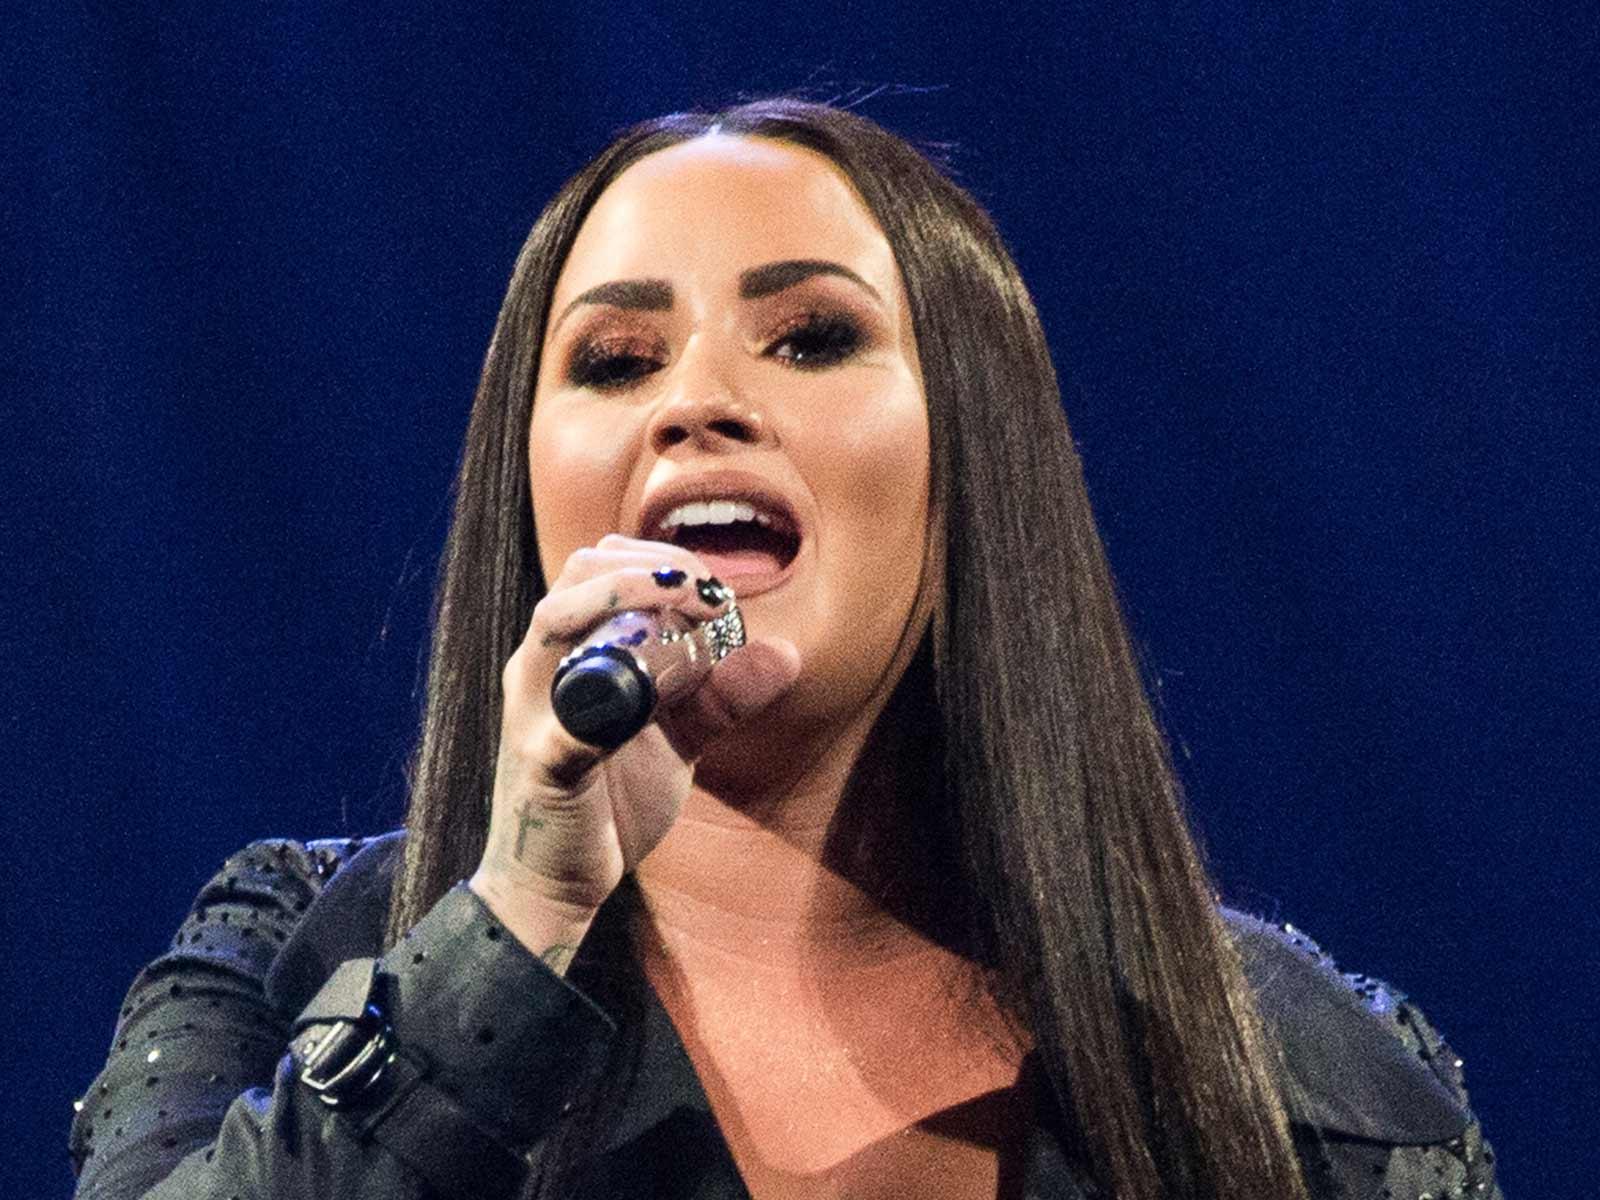 Demi Lovato Hospitalized Over Medical Emergency, Sources Close to Star Dispute Heroin Claim (UPDATE)